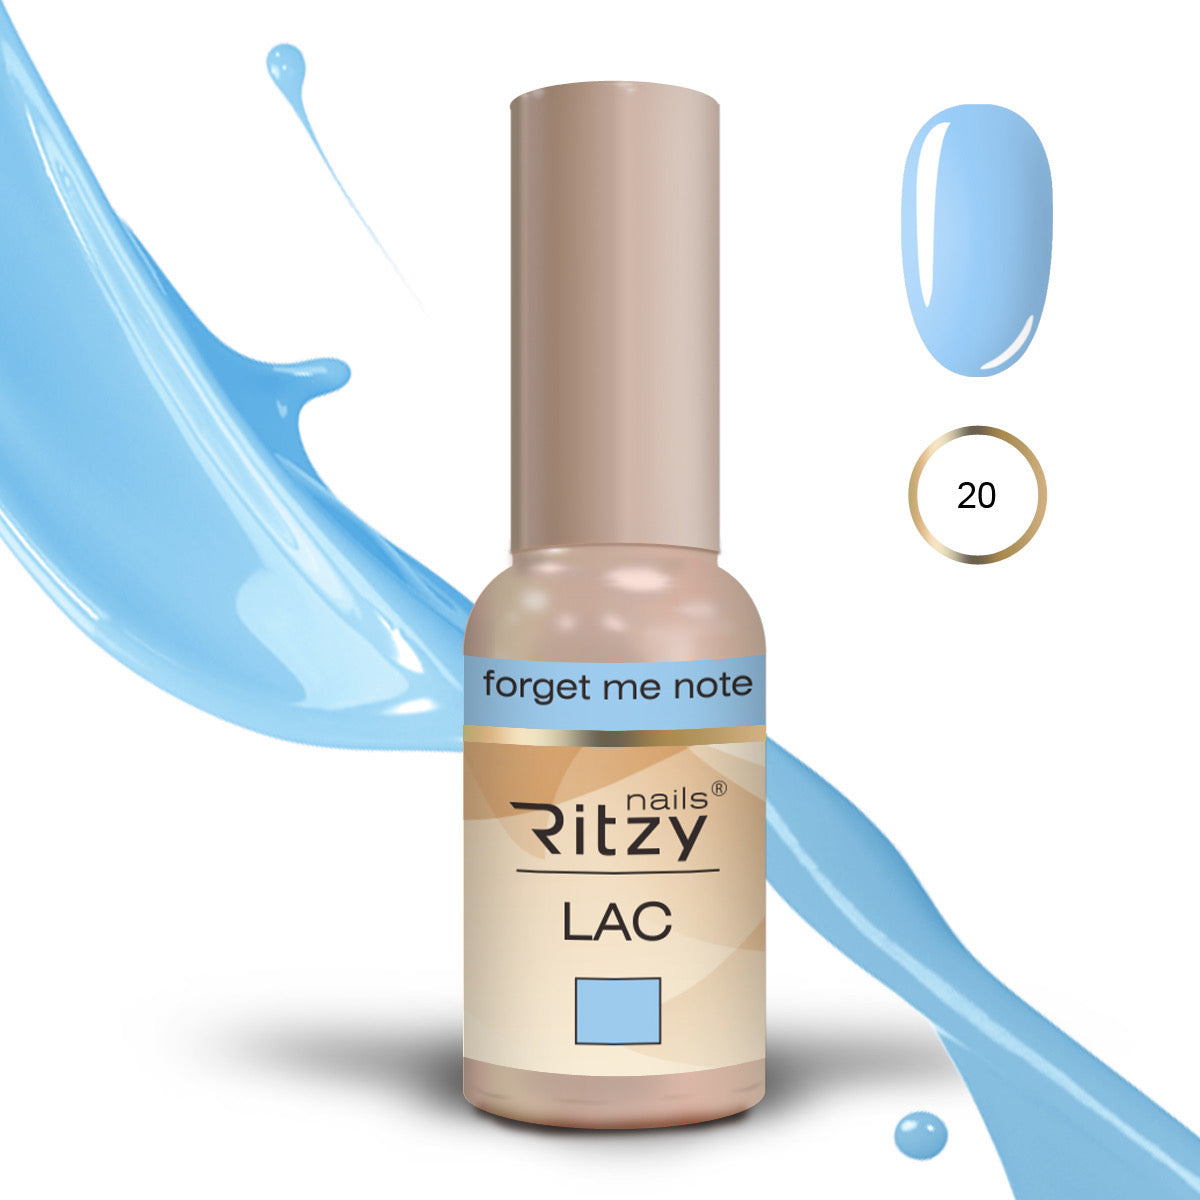 Ritzy Lac Forget  me note Nr 20